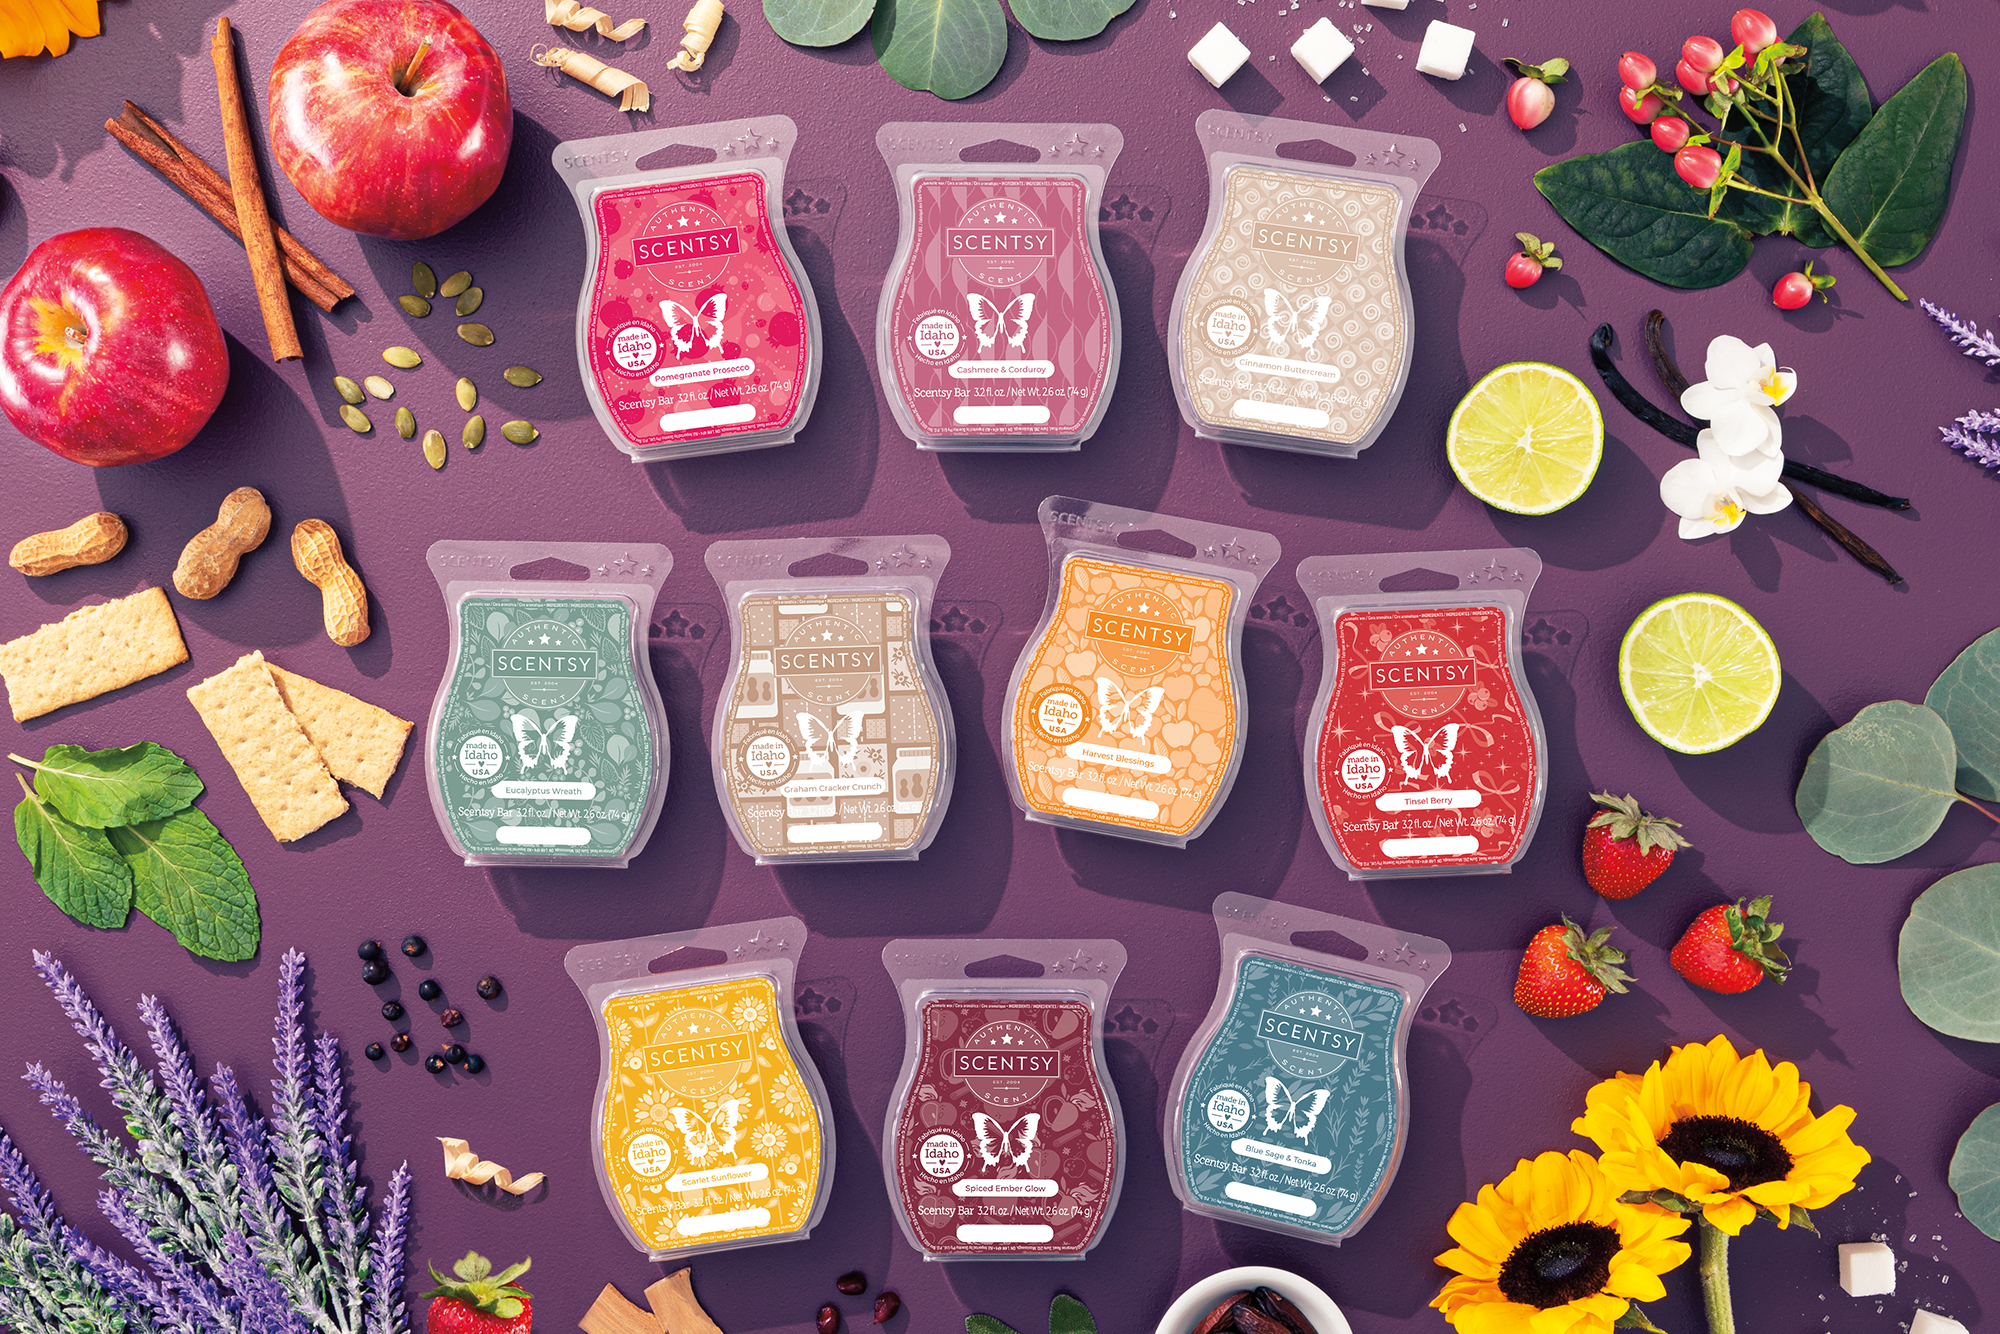 New Fall/Winter Fragrances from Scentsy